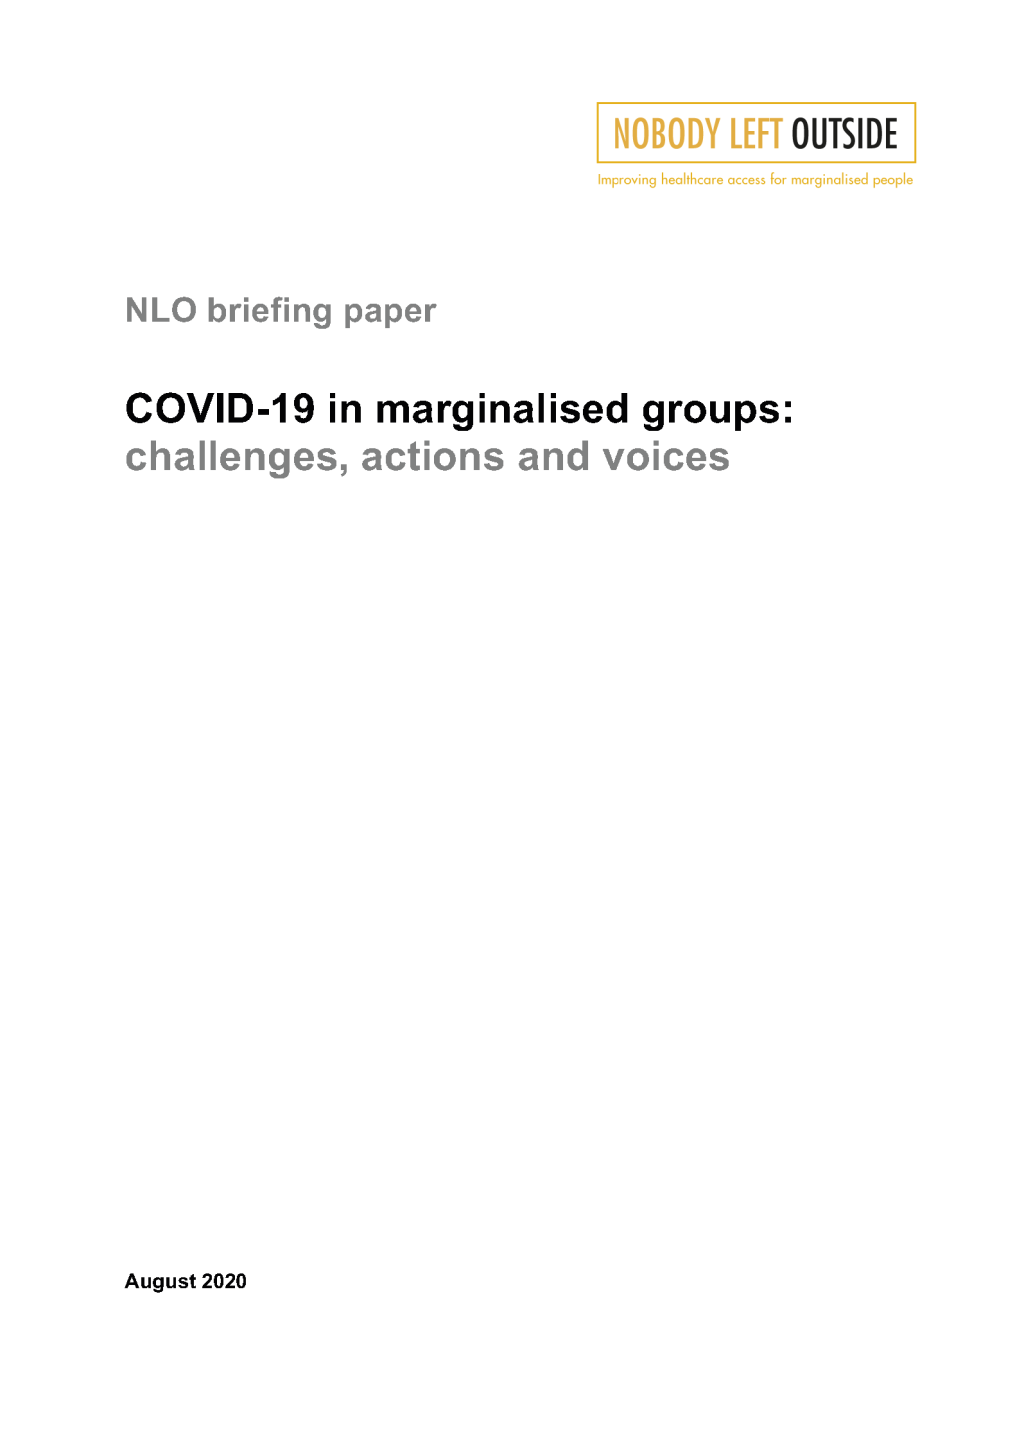 NLO-COVID-19-Briefing-paper-Final-August-2020-updatedpng